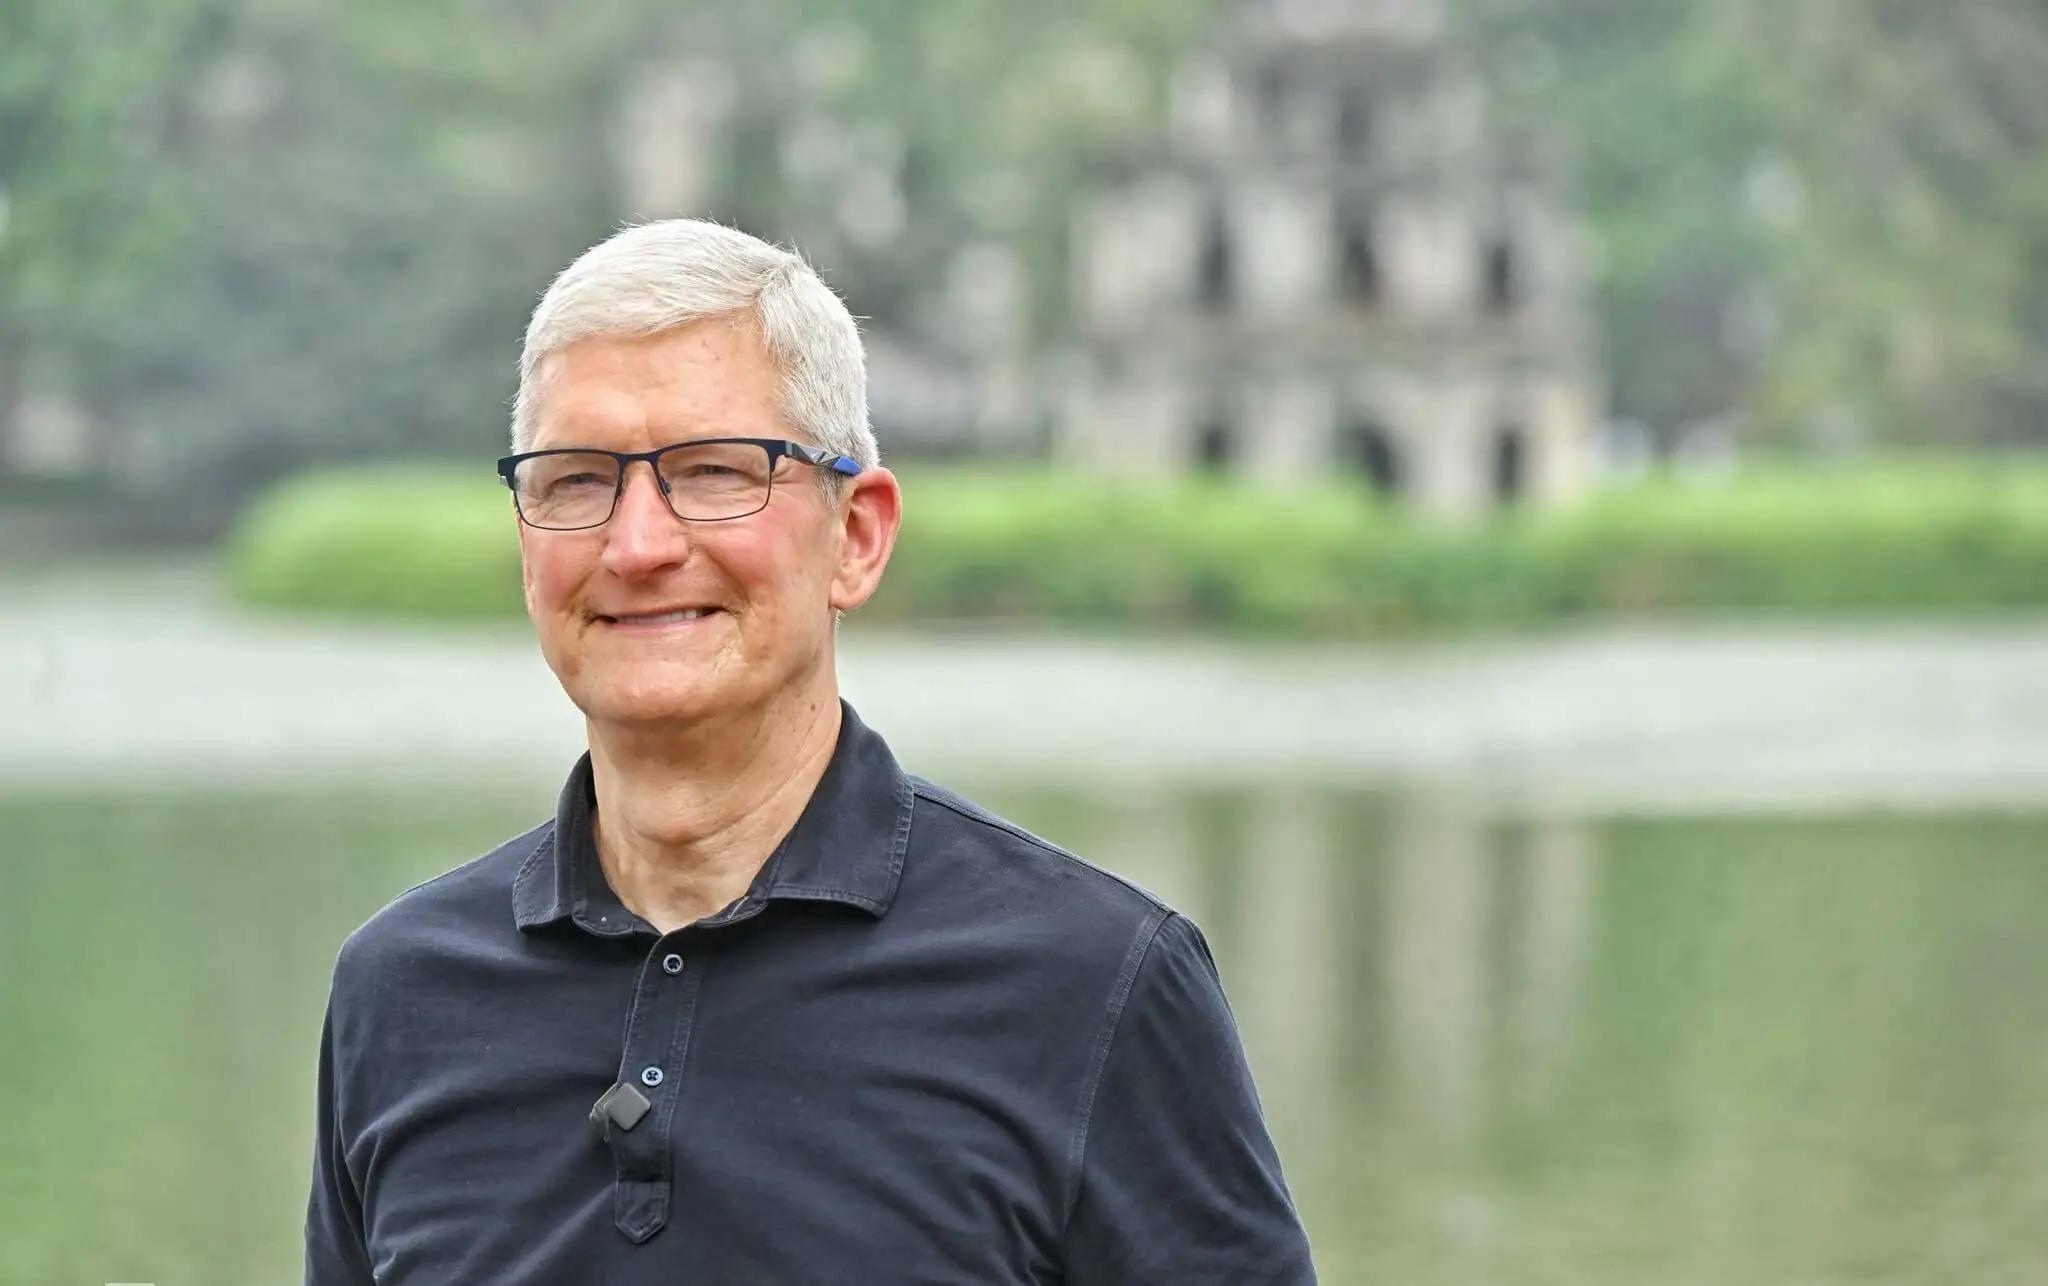 Tim Cook smiles for a photo at Hoan Kiem Lake in Hanoi, Vietnam. The Turtle Tower is visible in the background.